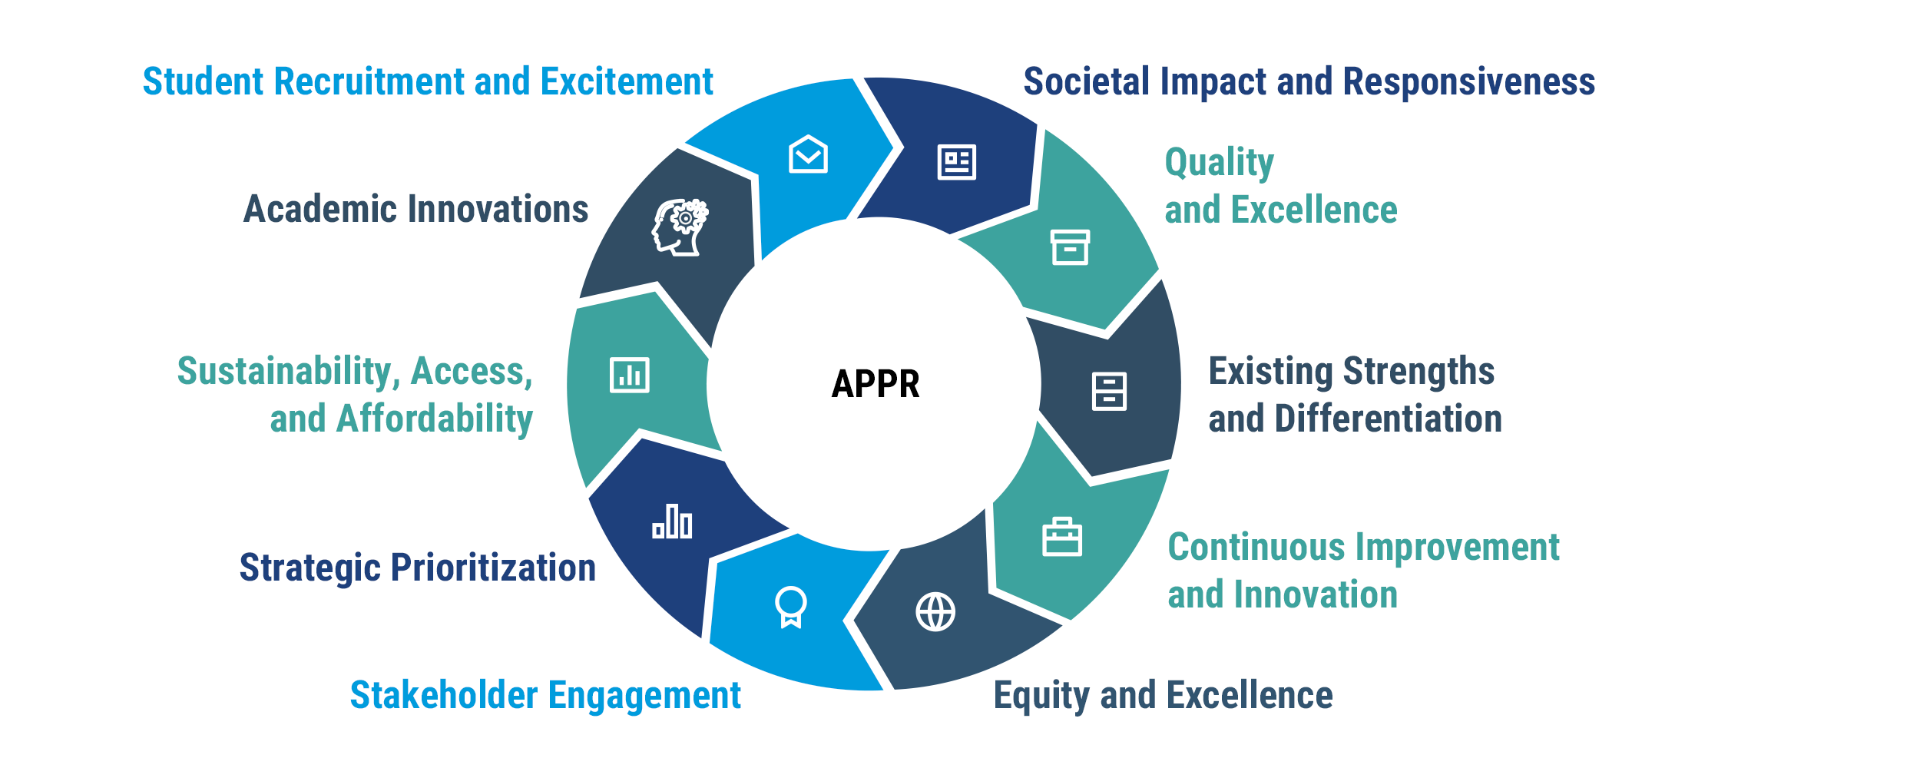 Circle graphic detailing the ten focus areas of APPR process, including societal impact and responsiveness, quality and excellence, existing strengths and differentiation, continuous improvement and innovation; equity and excellence; stakeholder engagement; strategic prioritization; sustainability, access, and affordability; academic innovations; and student recruitment and excitement